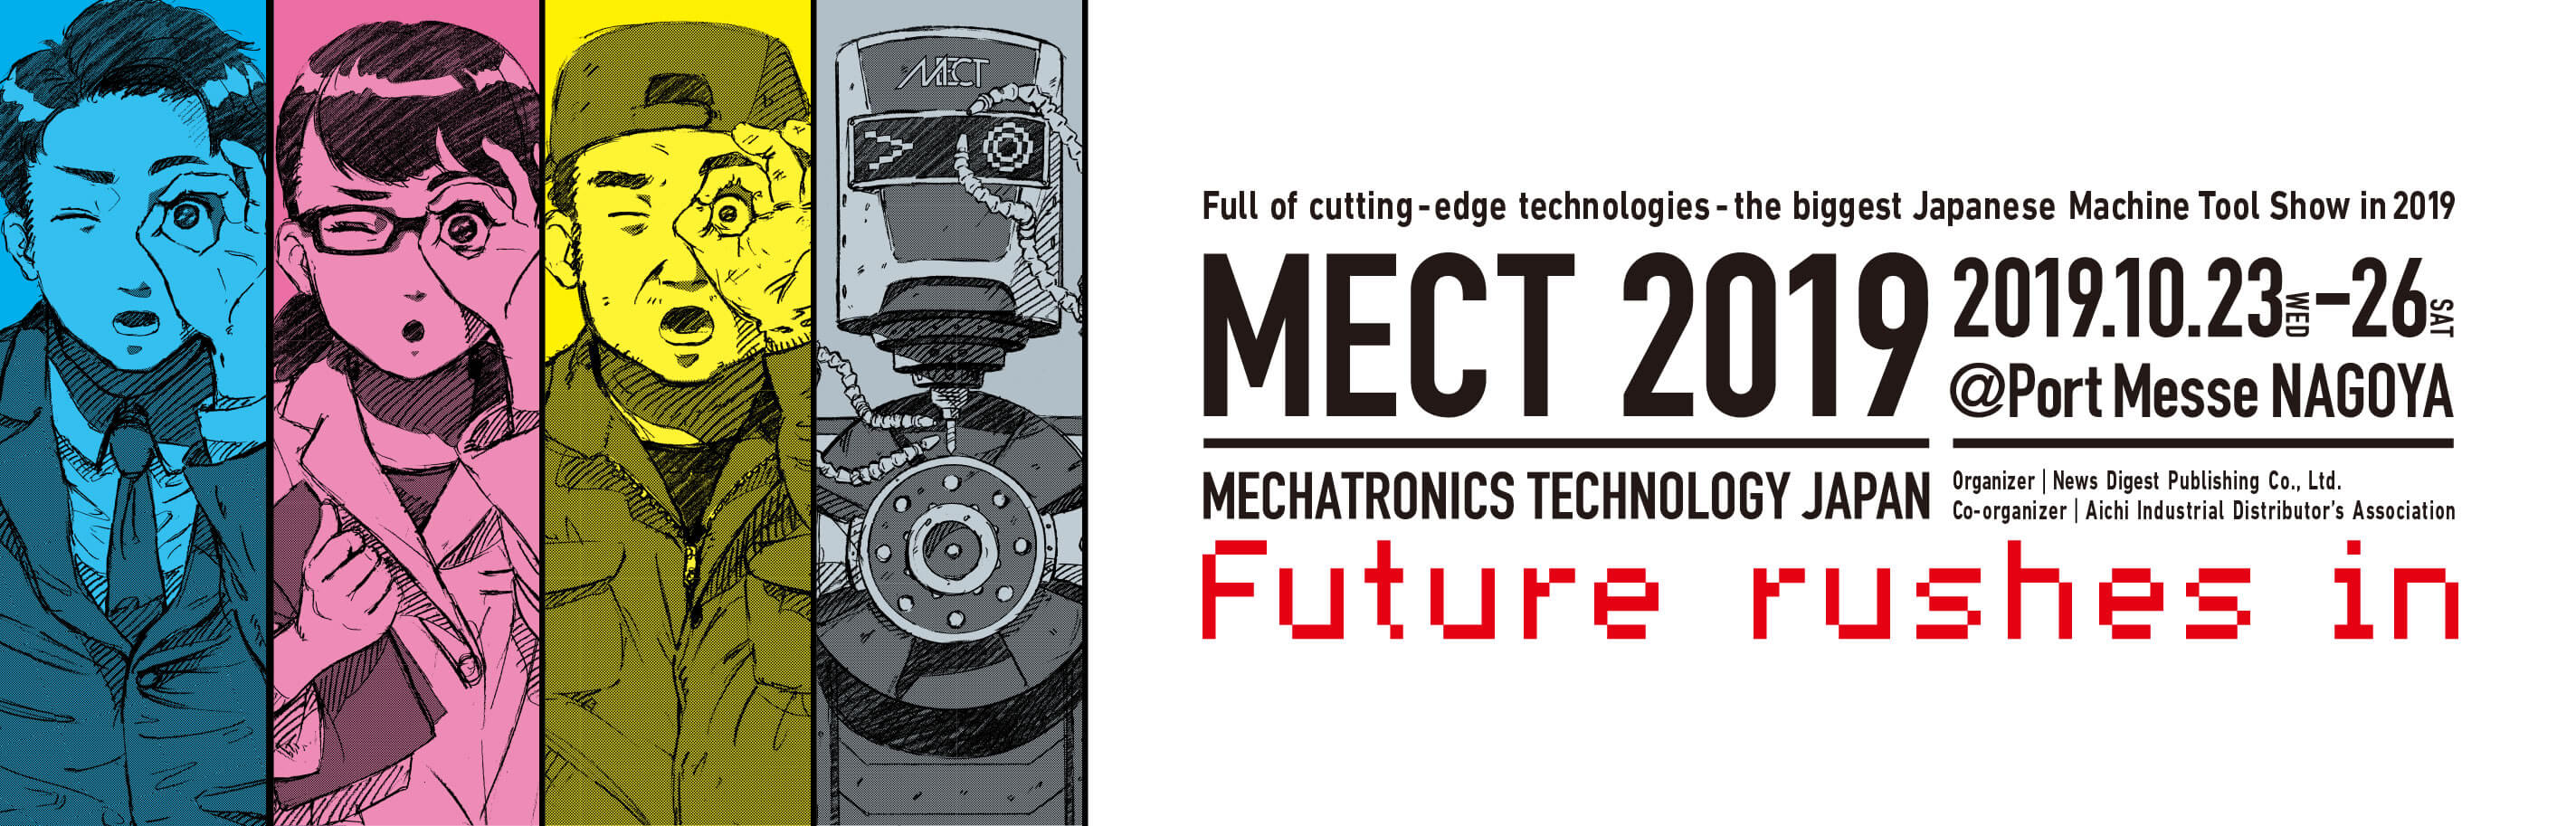 Full of cutting -edge technologies - the biggest machine tool show in JAPAN MECT2019 Future rushes in